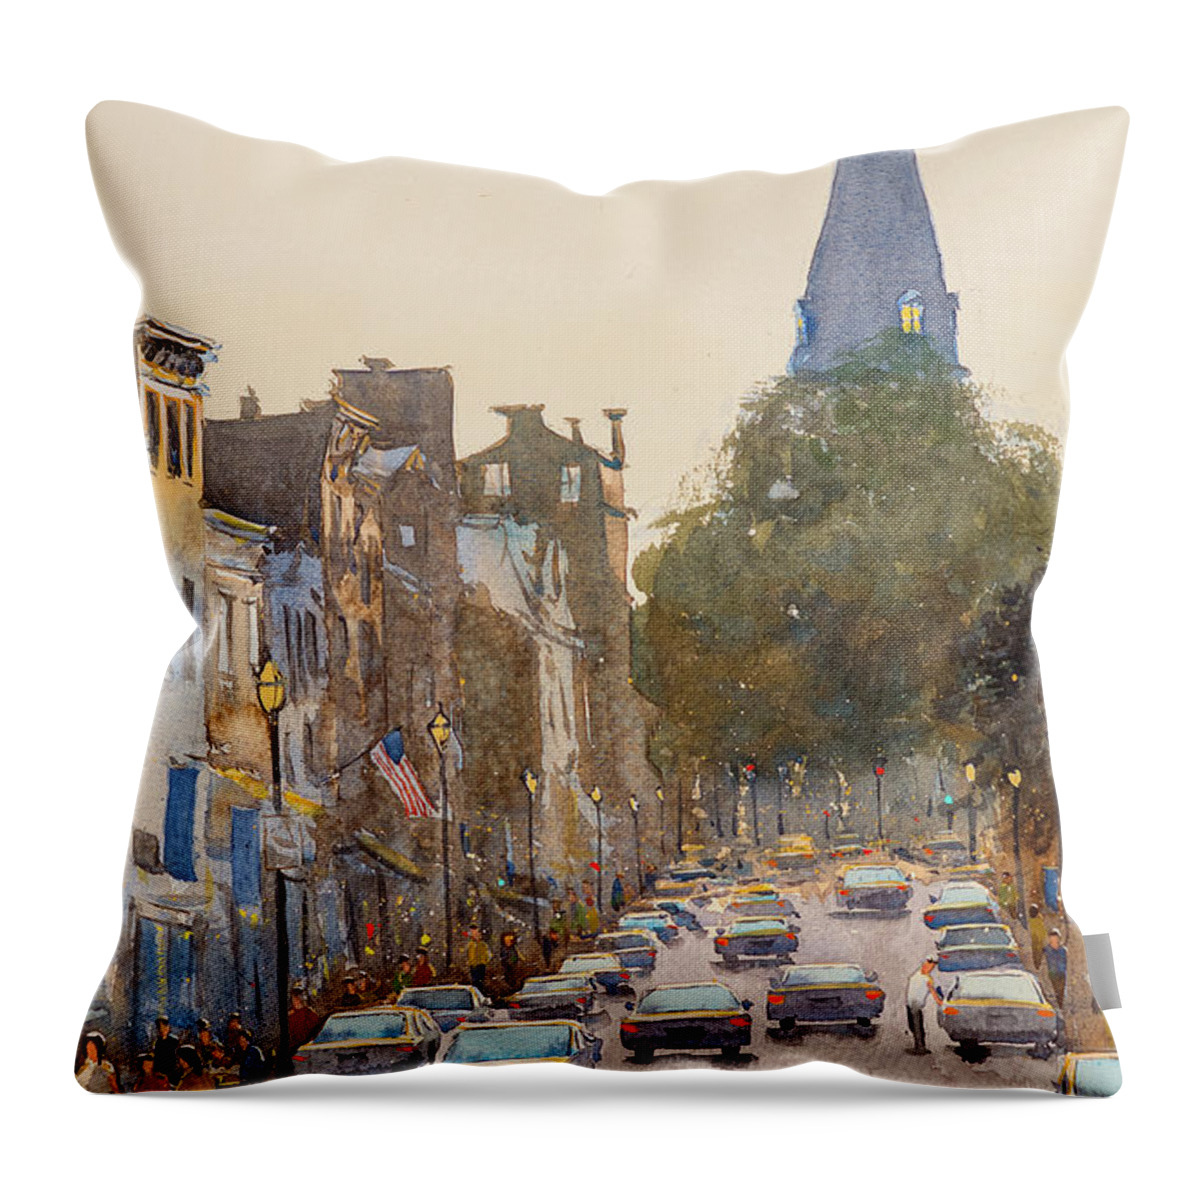 Annapolis Throw Pillow featuring the painting Annapolis Main Street by Tesh Parekh